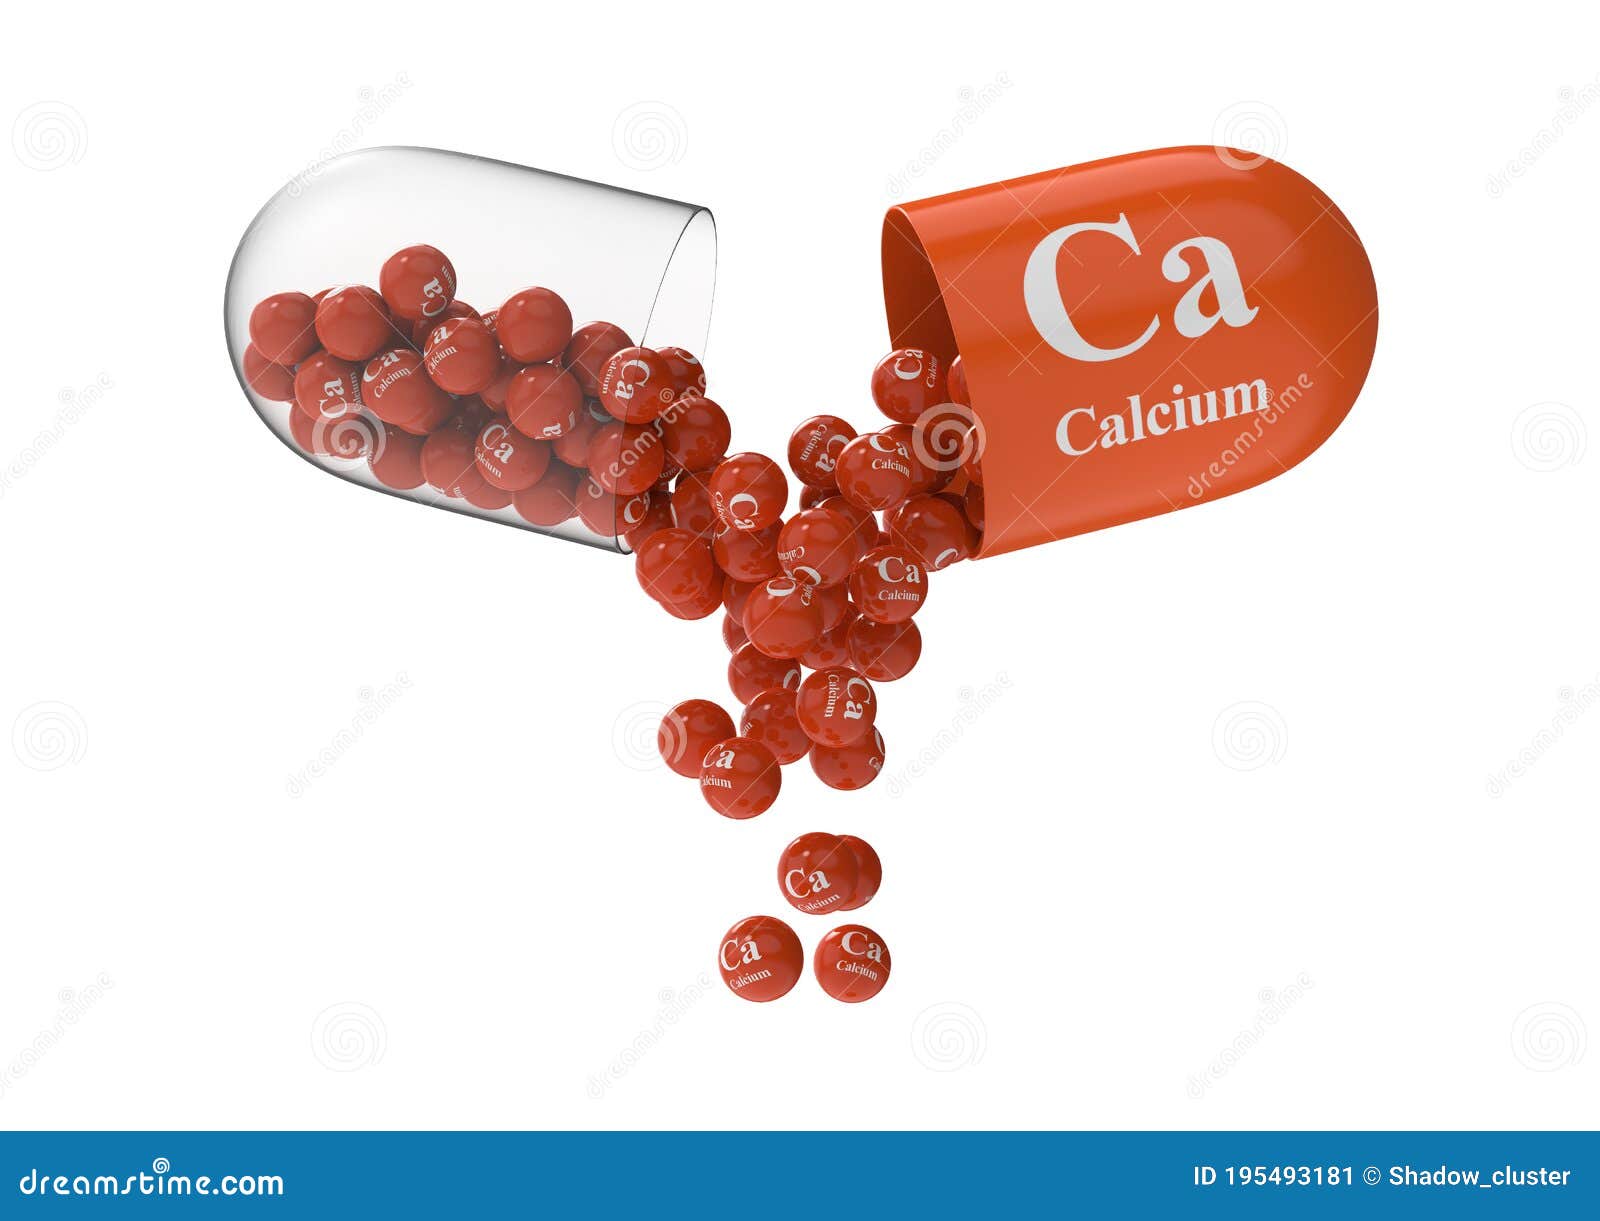 open capsule with calcium from which the vitamin composition is pouring